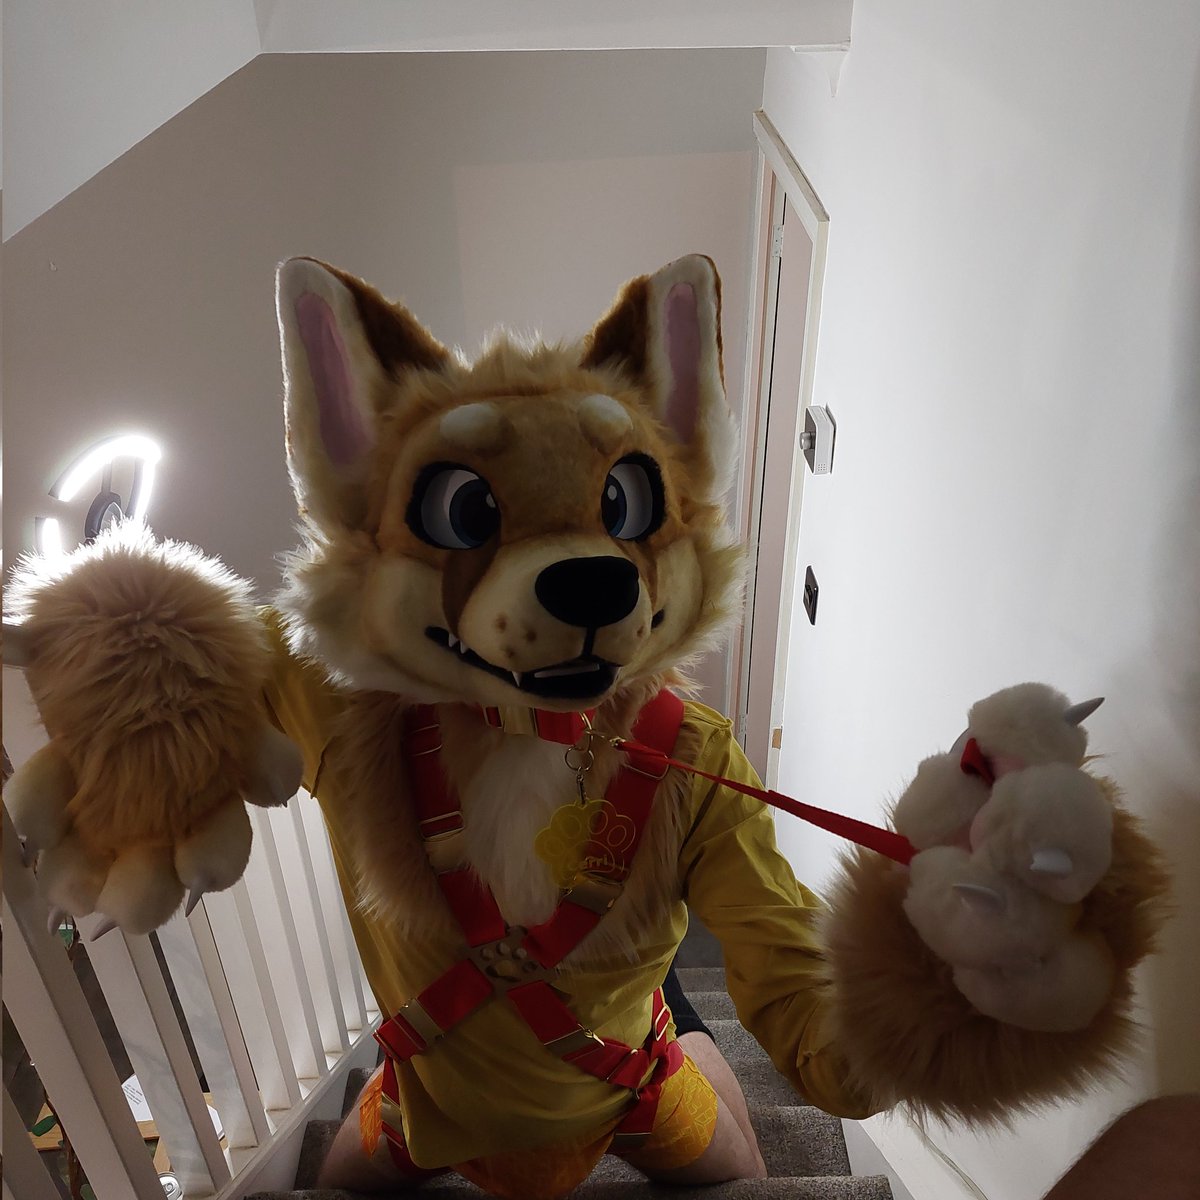 Mildly horny harness hours. You want the leash?